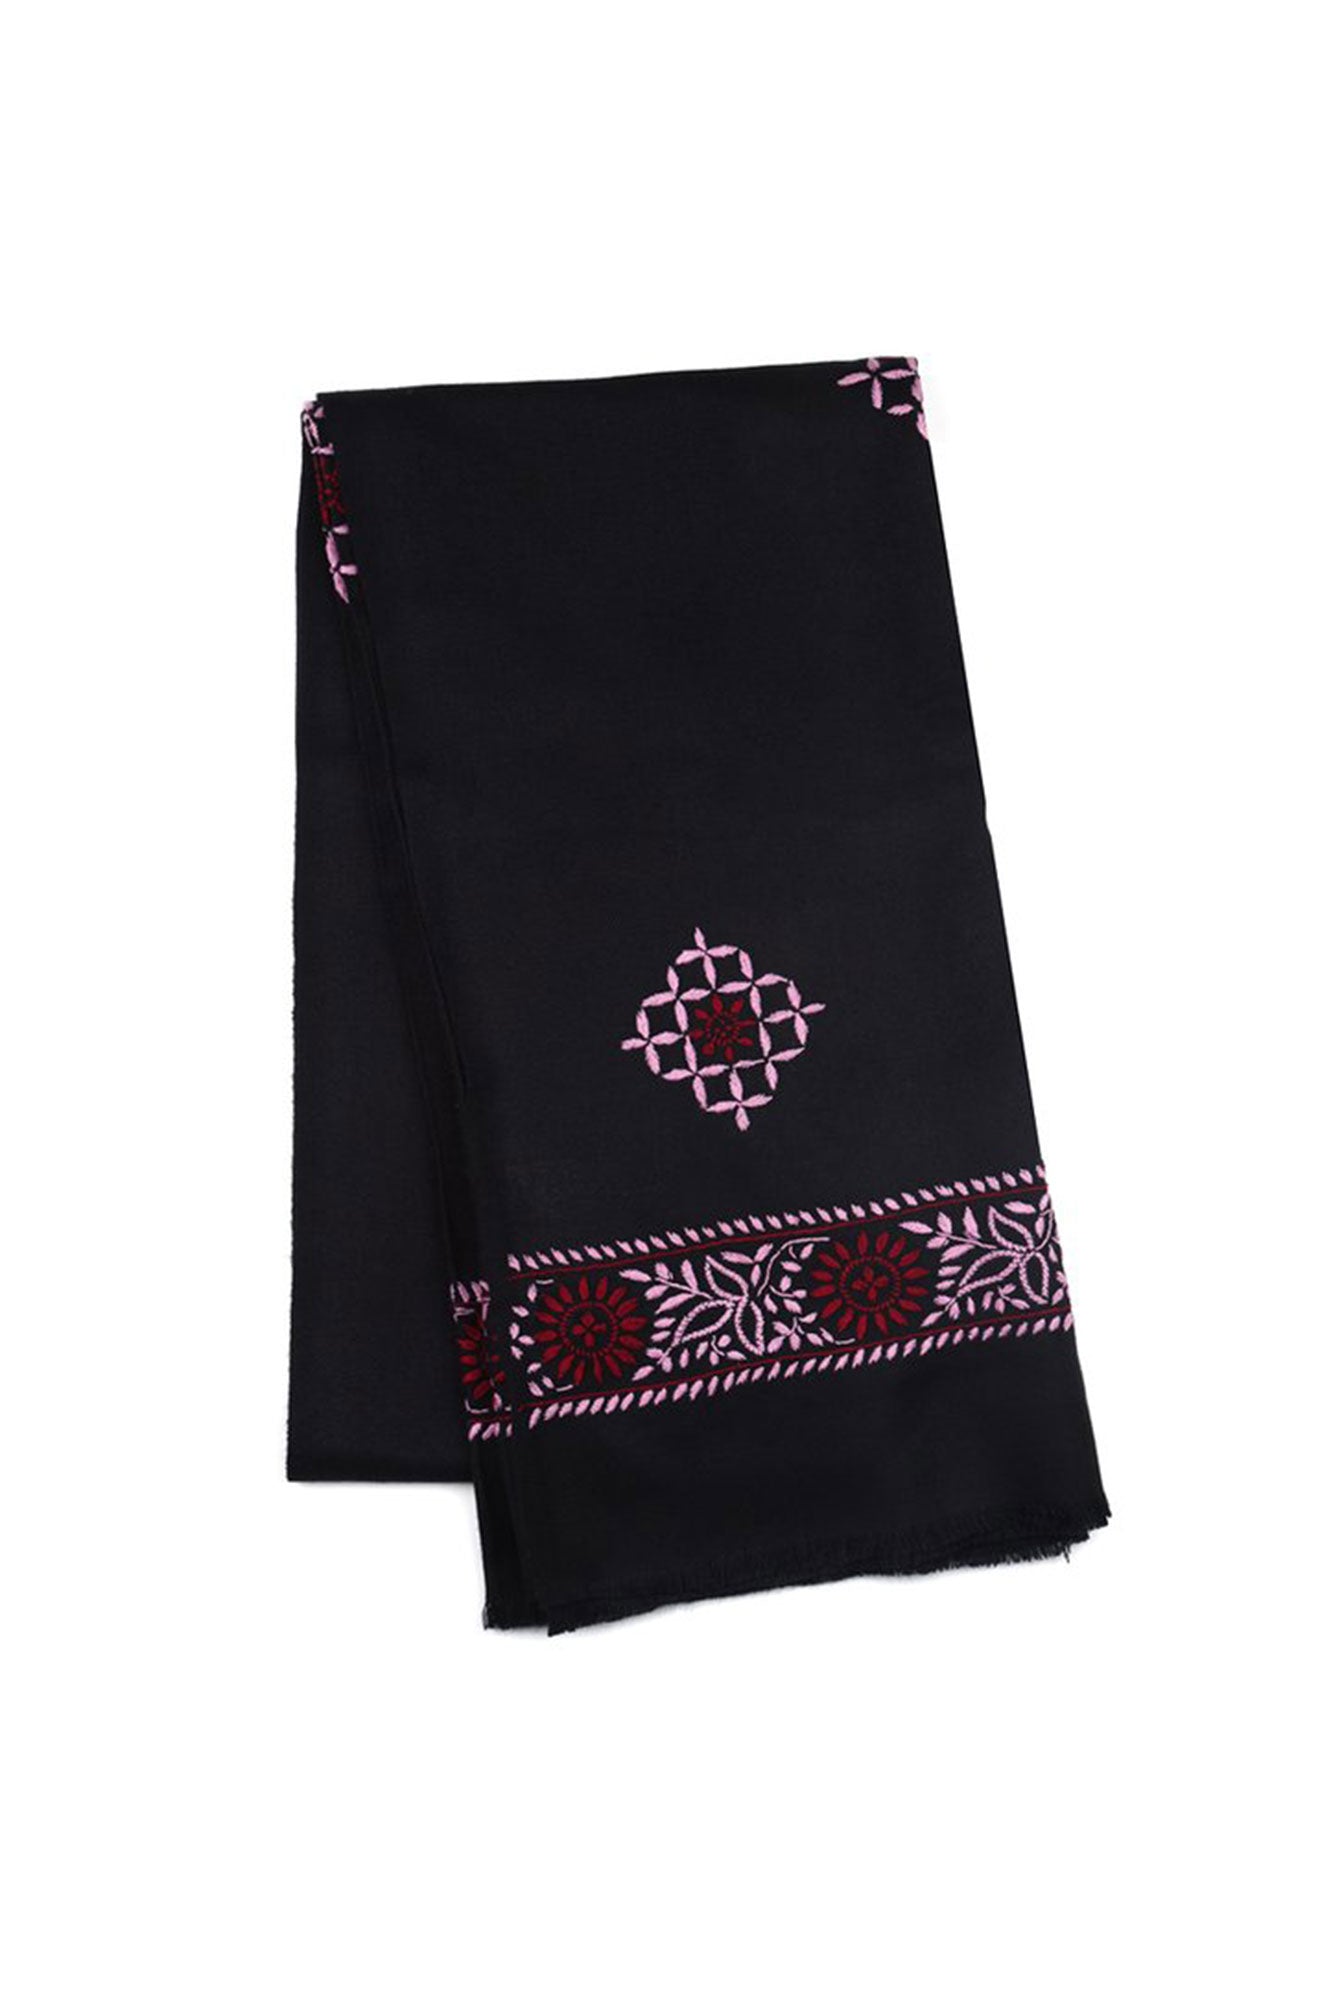 BLACK WOOLLEN SHAWL WITH MAGENTA AND LAVENDER CHIKANKARI EMBROIDERY